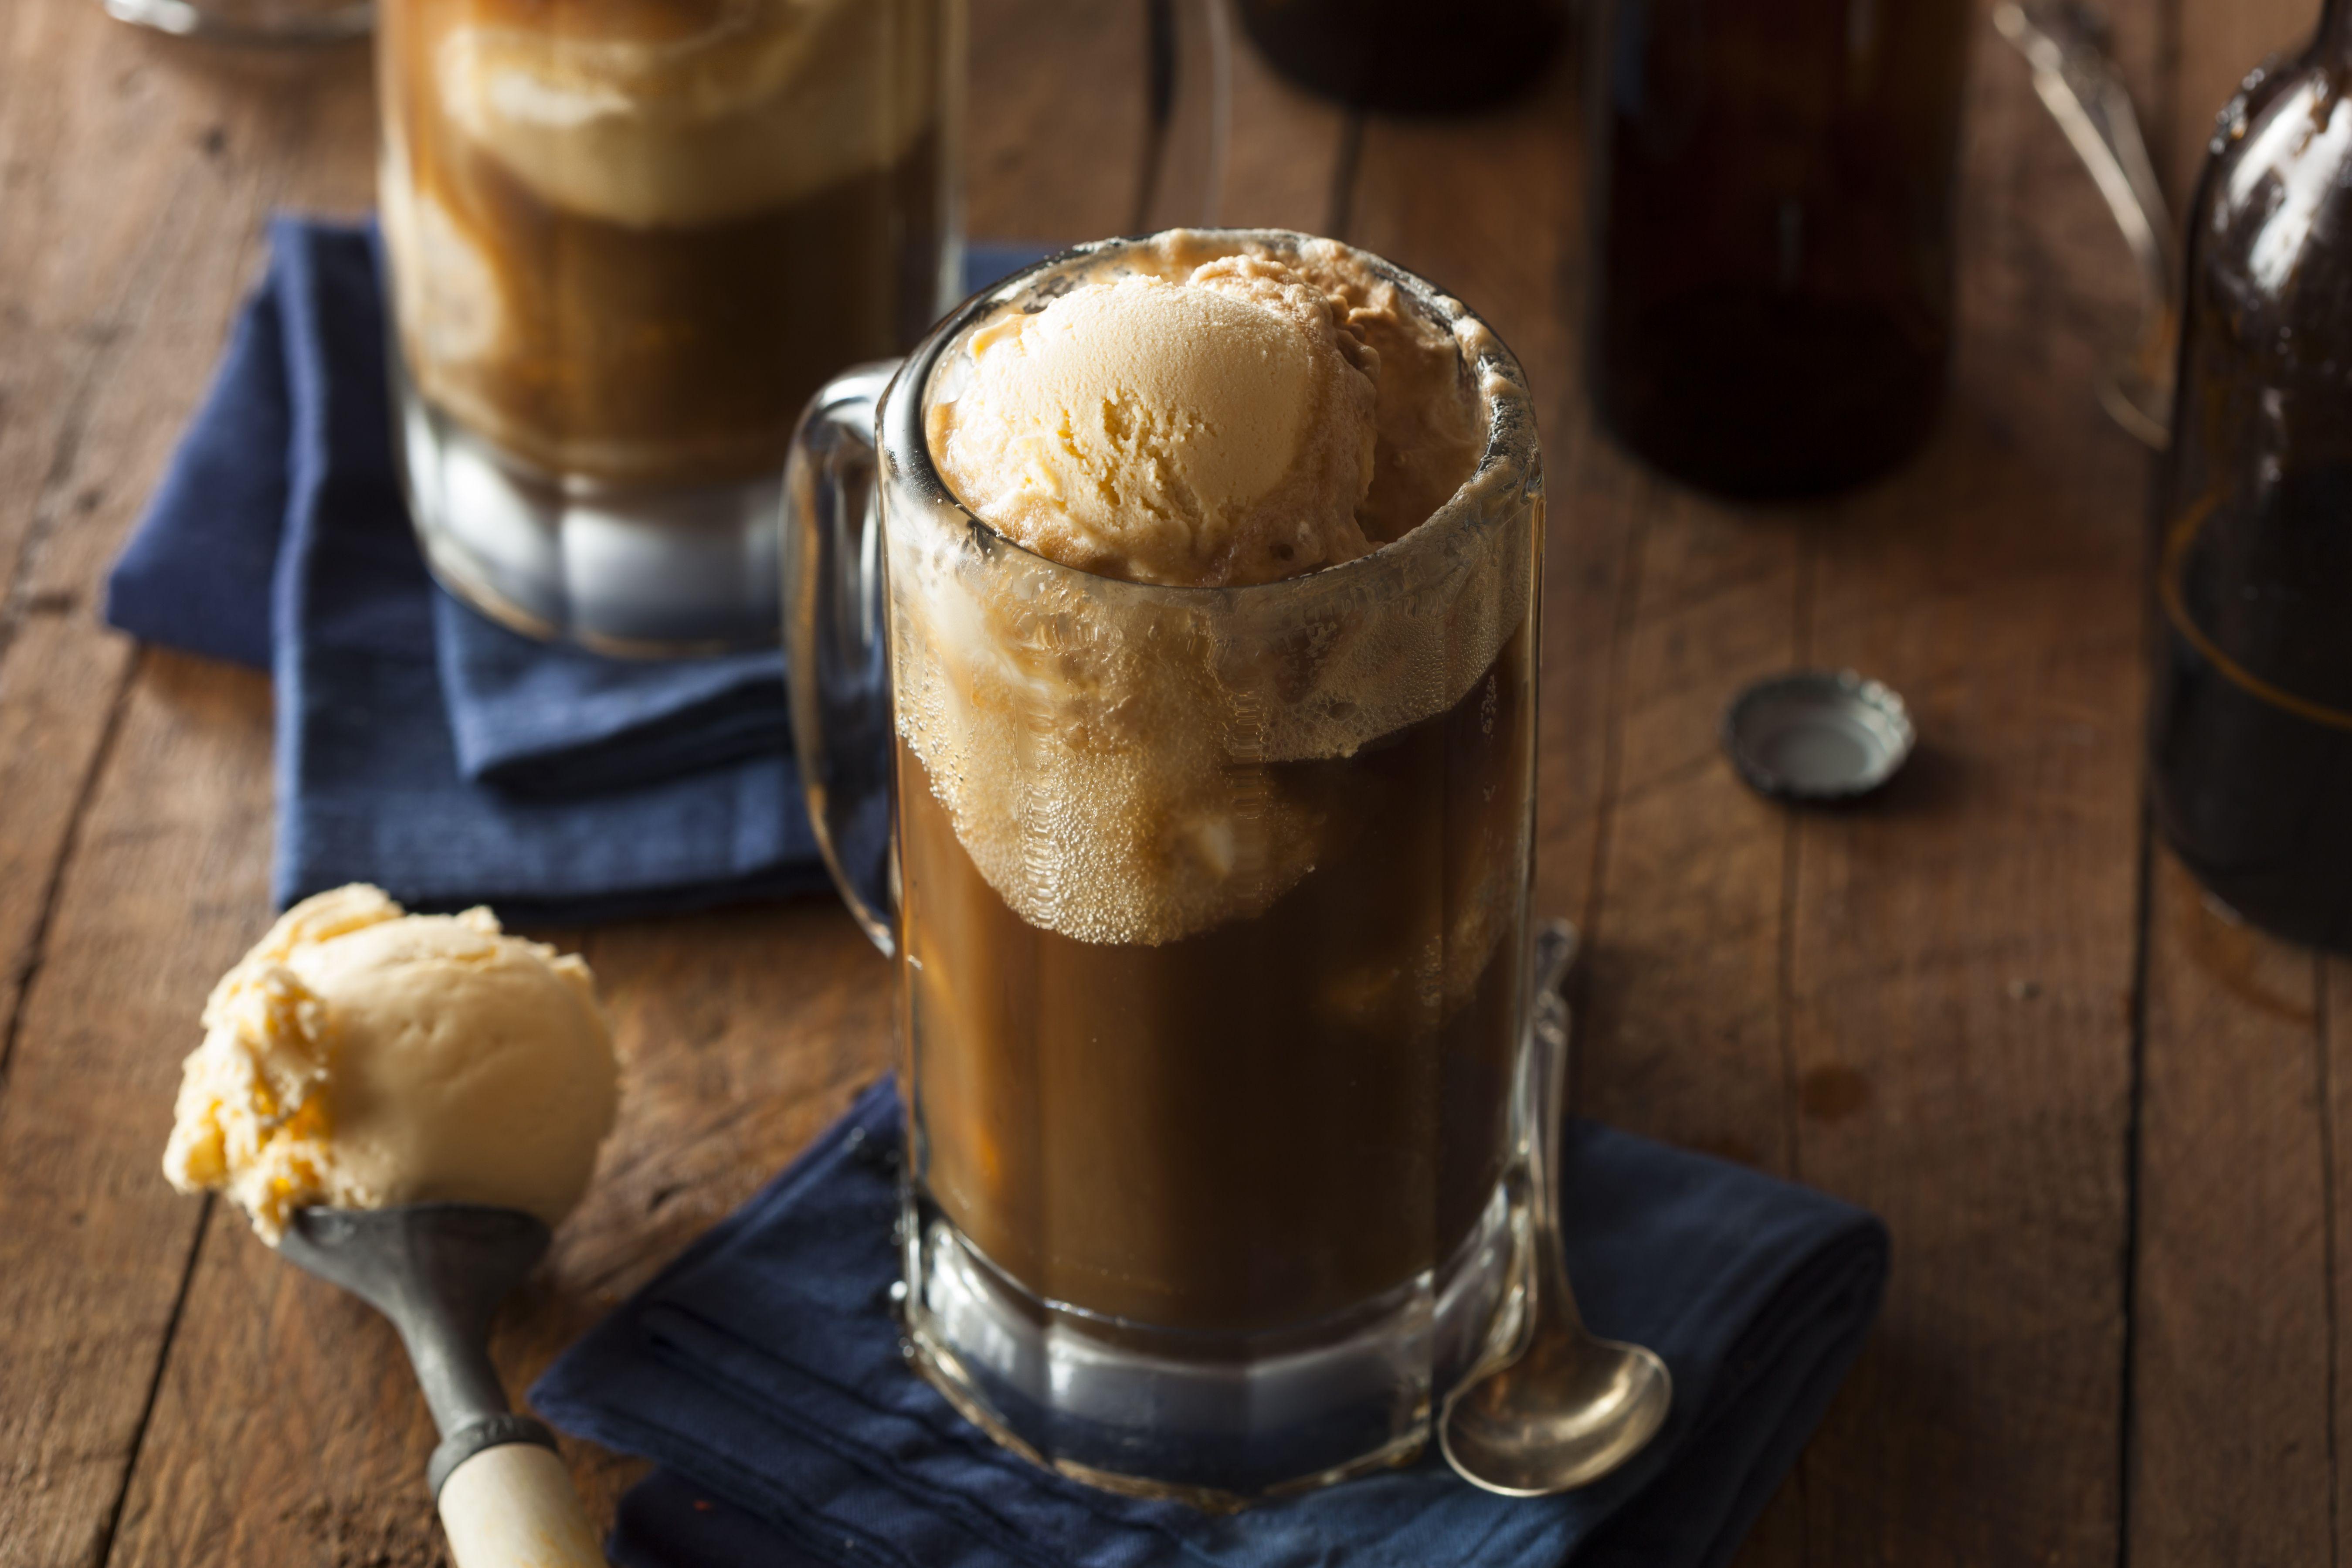 Two root beer floats with scoop full of vanilla ice cream next to them.